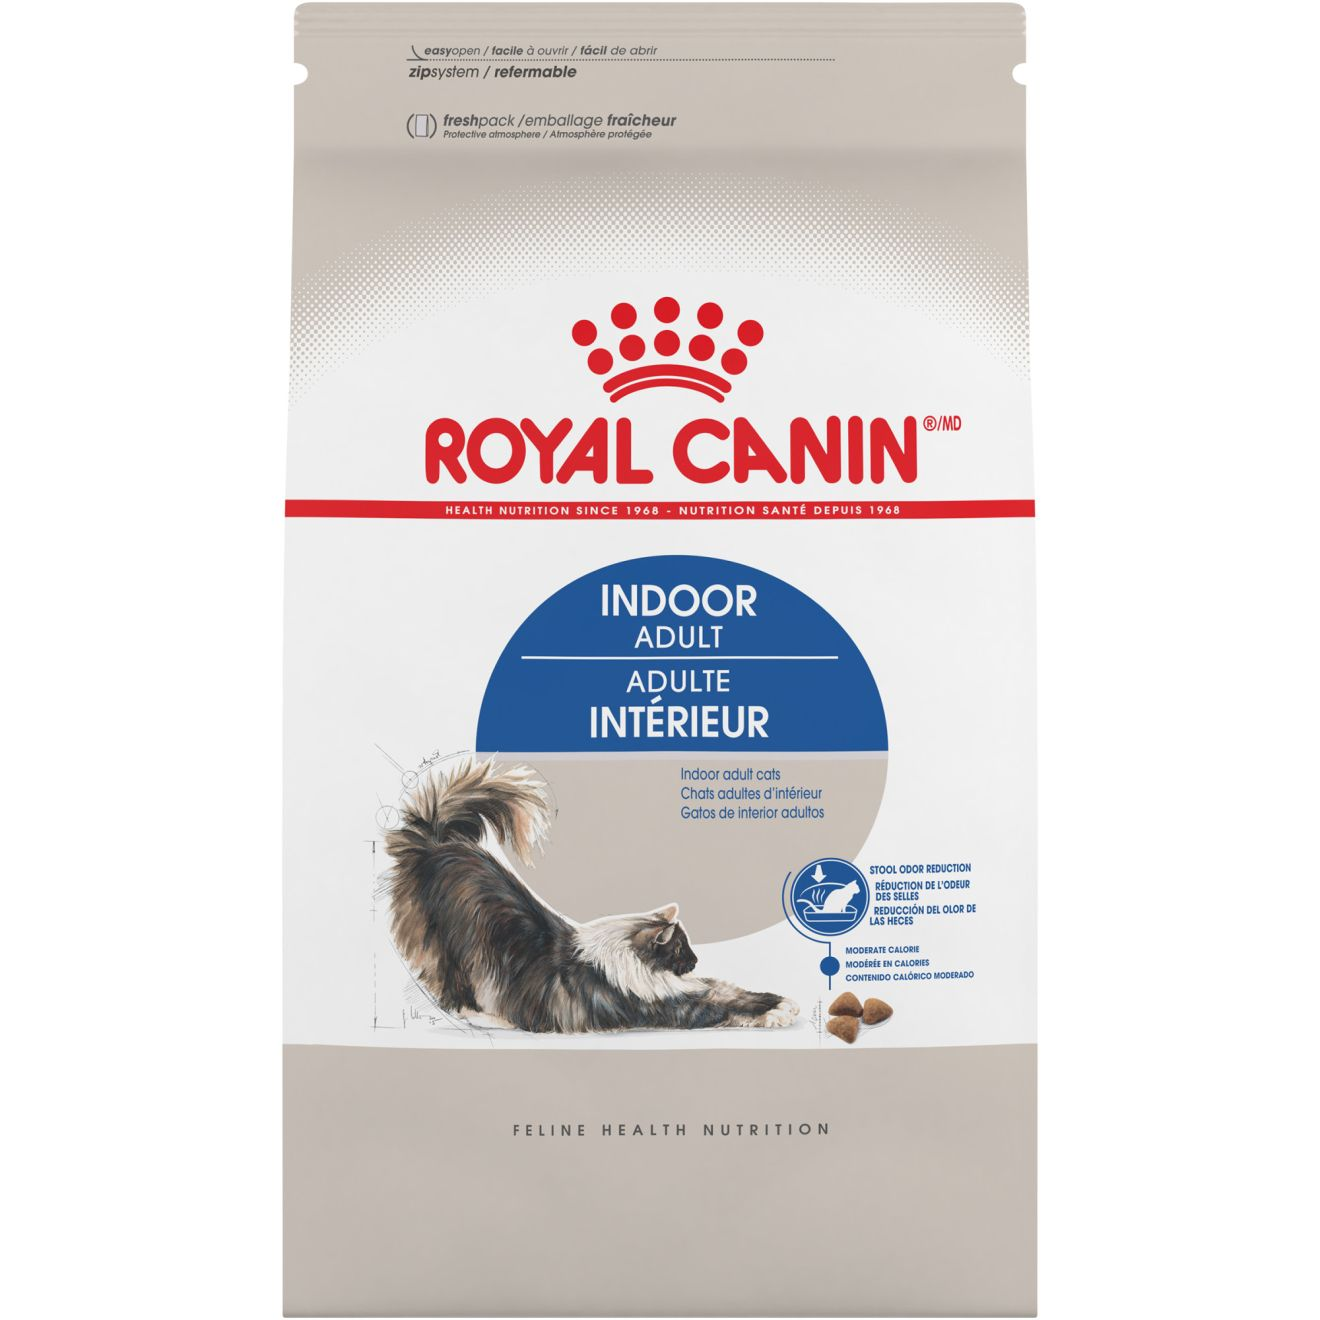 royal canin indoor adult dry cat food 4kg